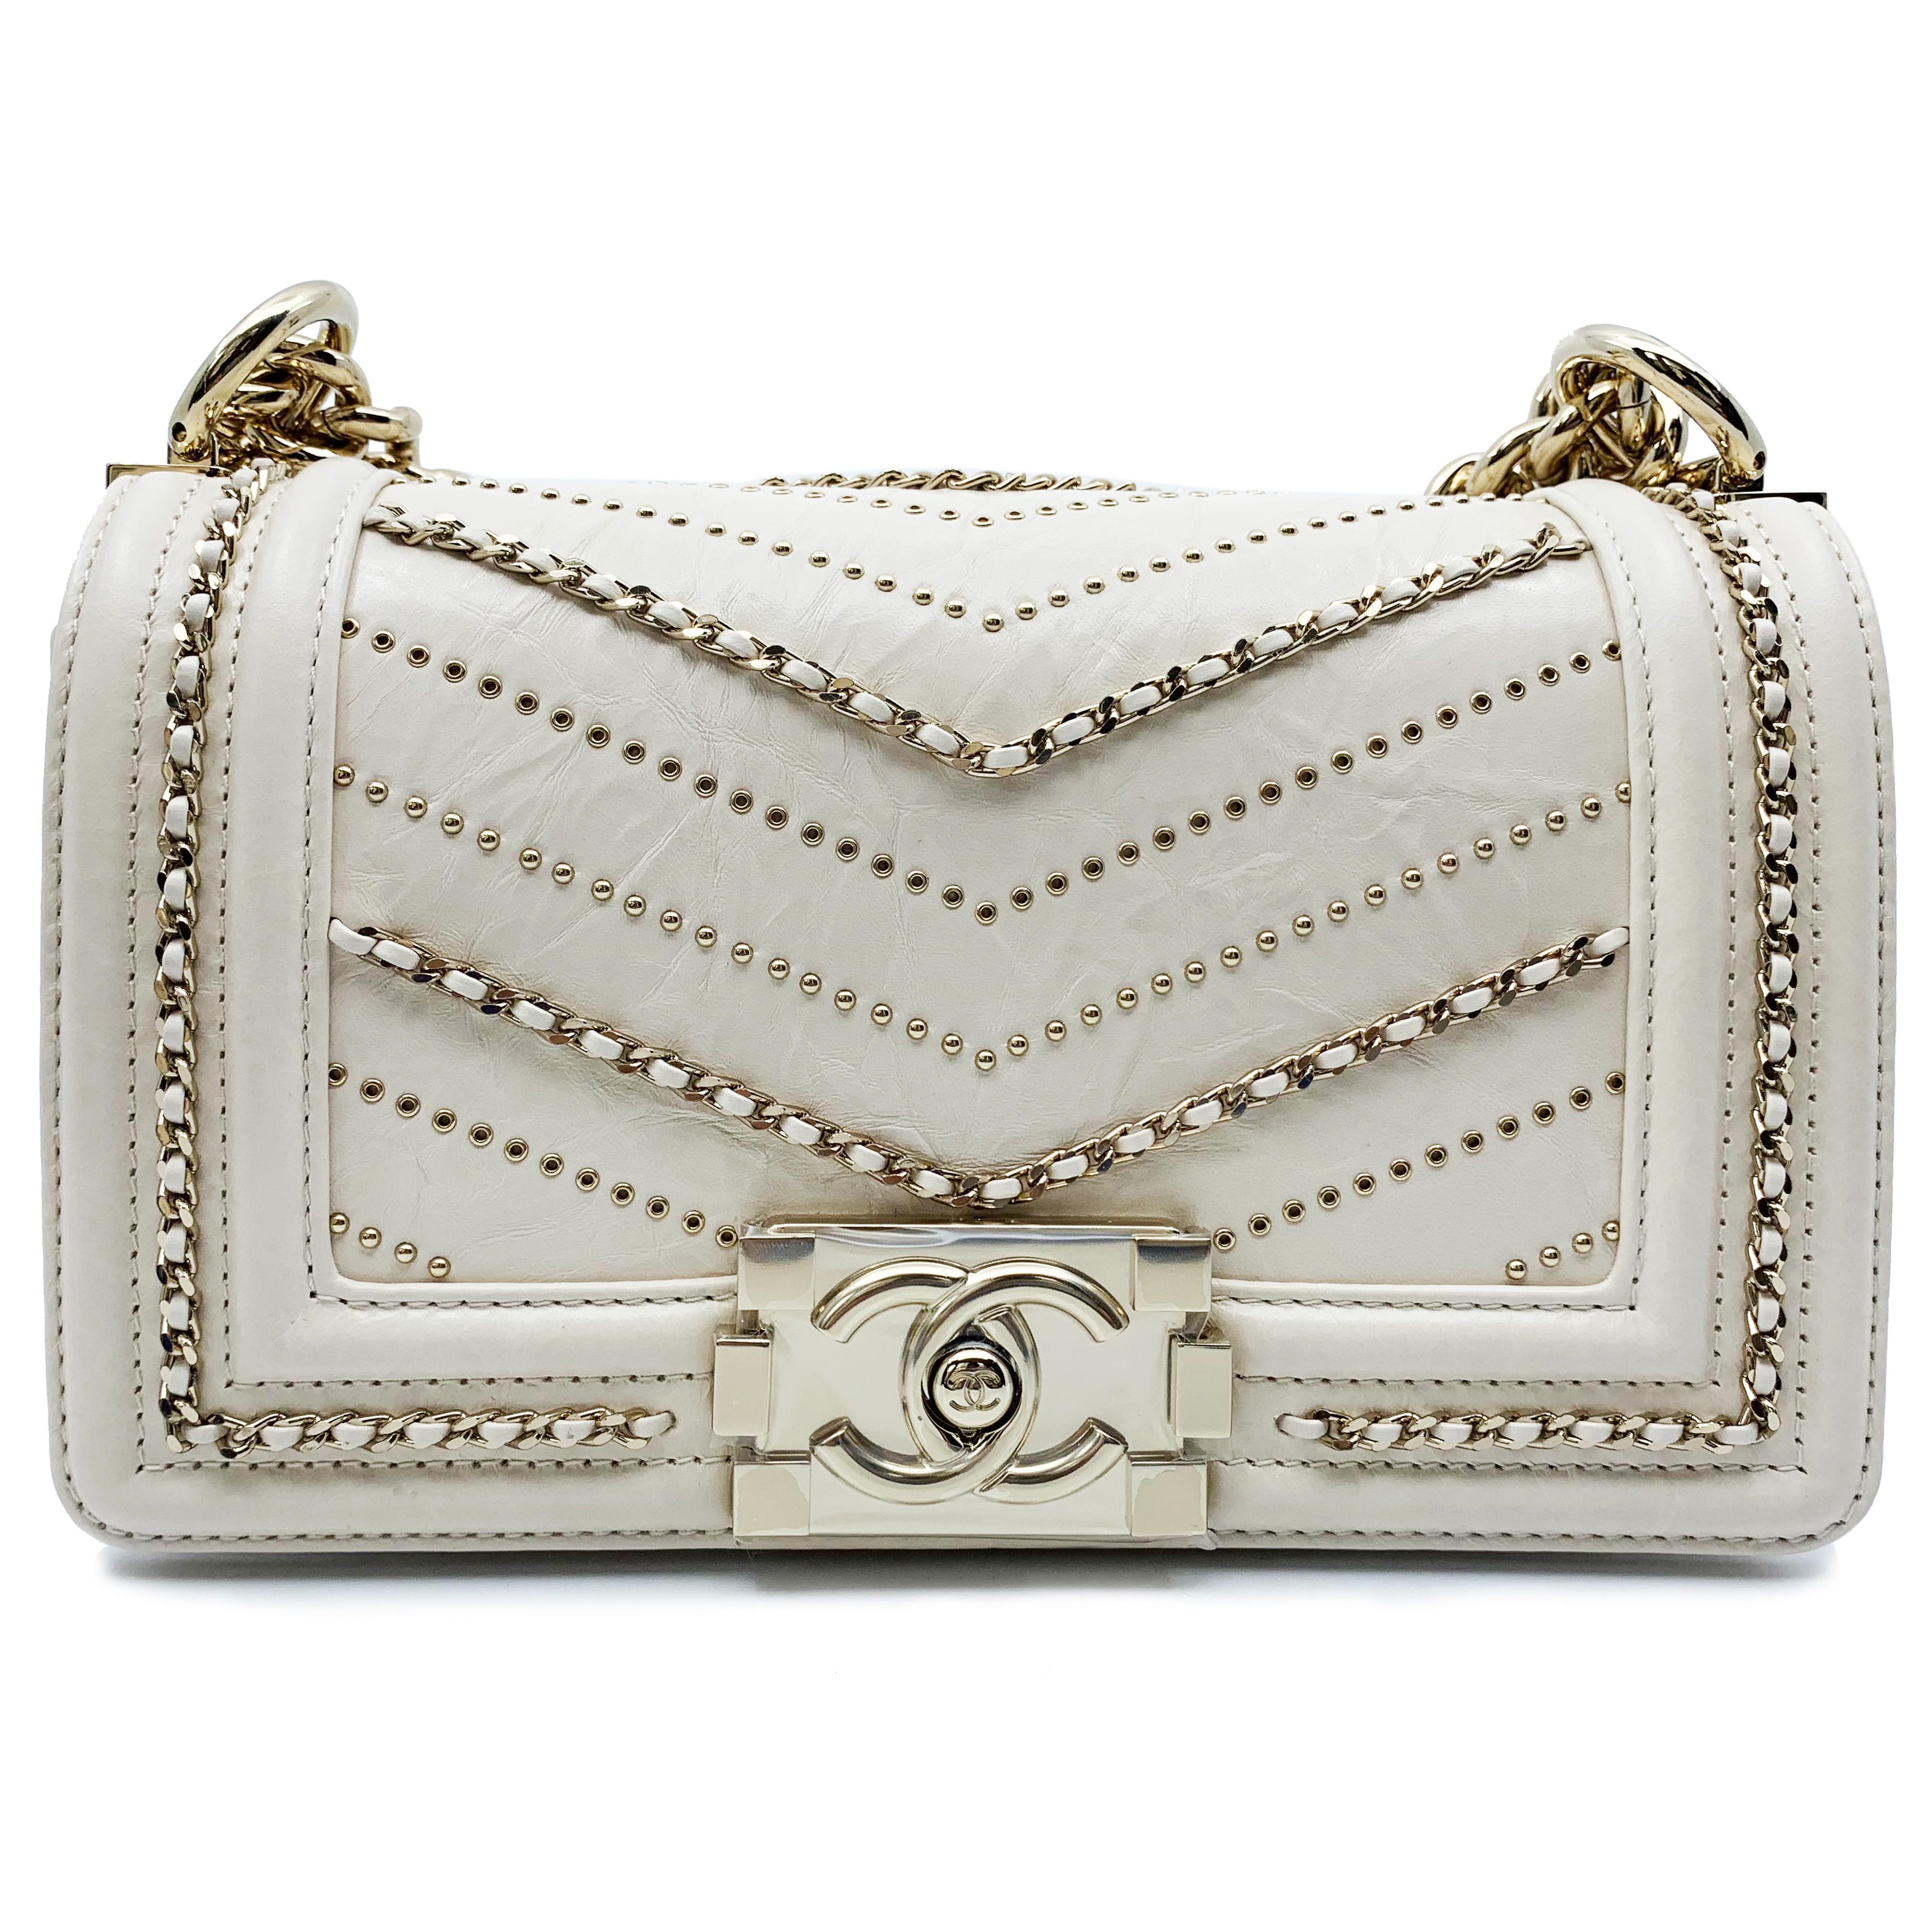 Chanel Crumpled Calfskin Small Boy Bag Ivory 2018 Collection A67085 Y83967 10800

Super rare!

Comes with Authenticity certificate.
Tags are attached.
Crumpled Calf Skin Leather.
Detachable Leather and Chain Strap.
Measures: 8*5*3inches
Detachable